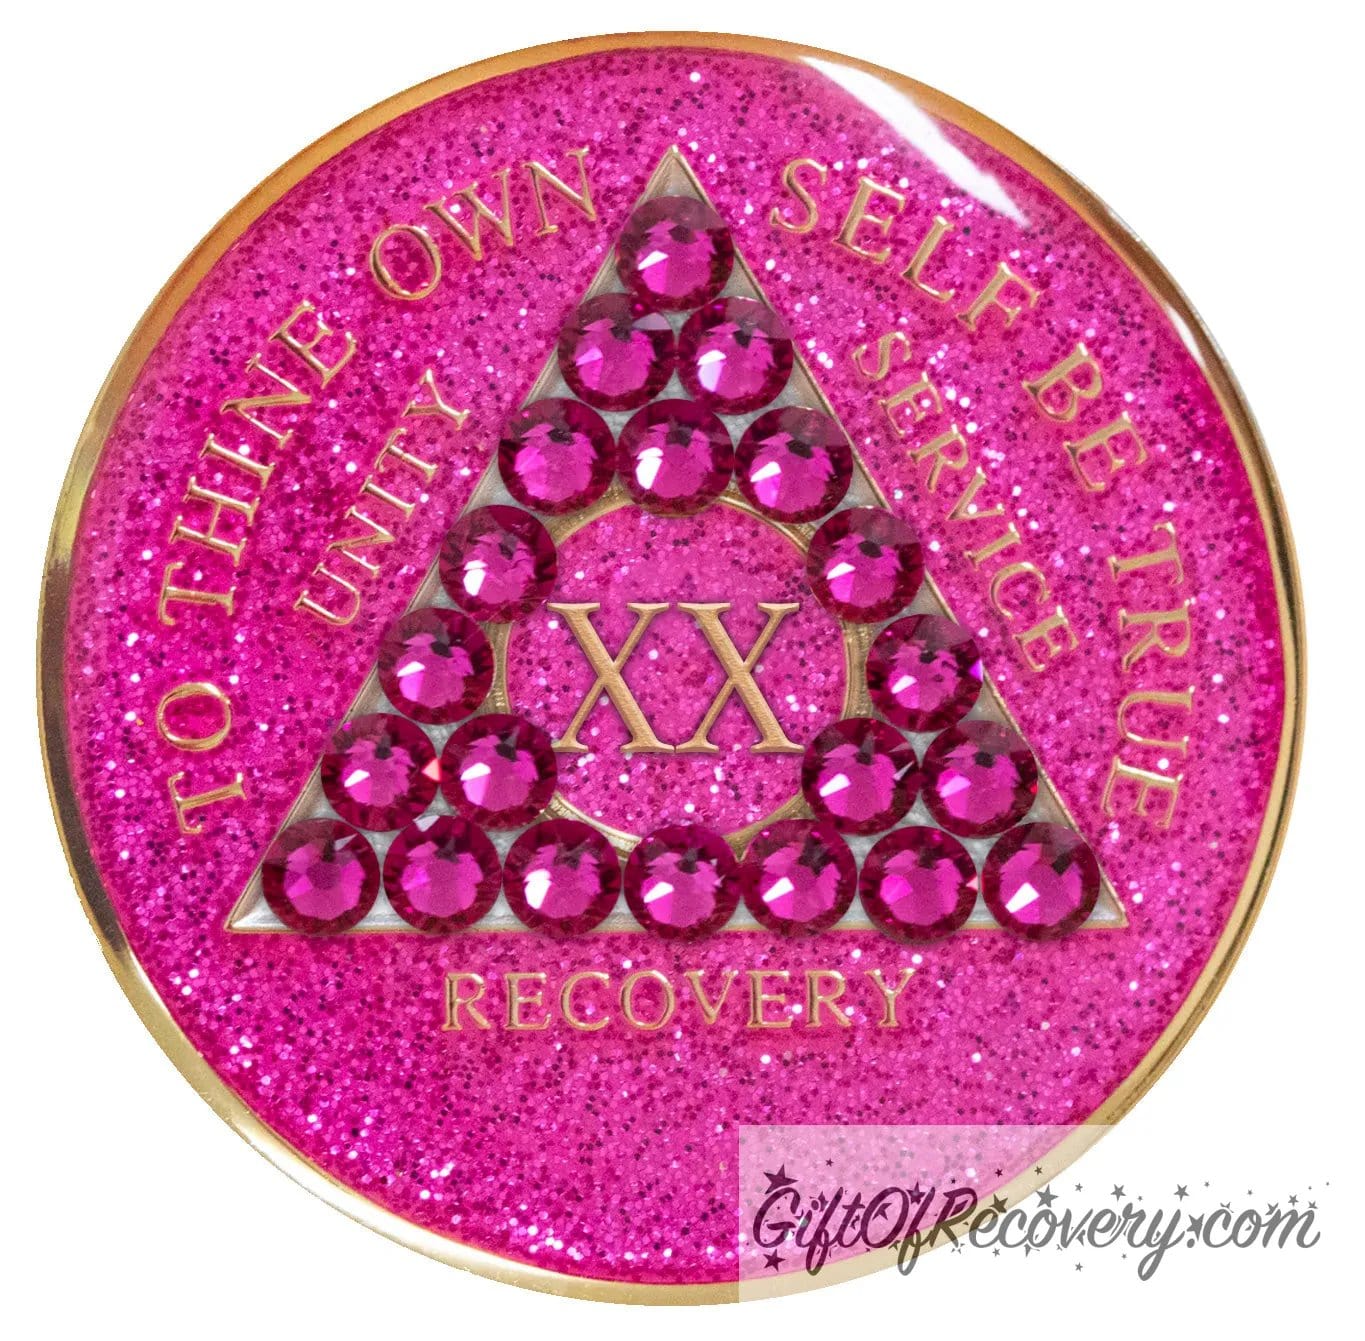 20 year Princess Pink Glitter AA medallion with 21 genuine fuchsia crystals in the shape of a triangle in the center of the recovery medallion, for your favorite sober princess, and to thine own self be true, unity, service, recovery, the roman numeral in the middle, and the outer rim, embossed in 14k plated brass, the aa medallion is sealed in resin for a shiny finish.